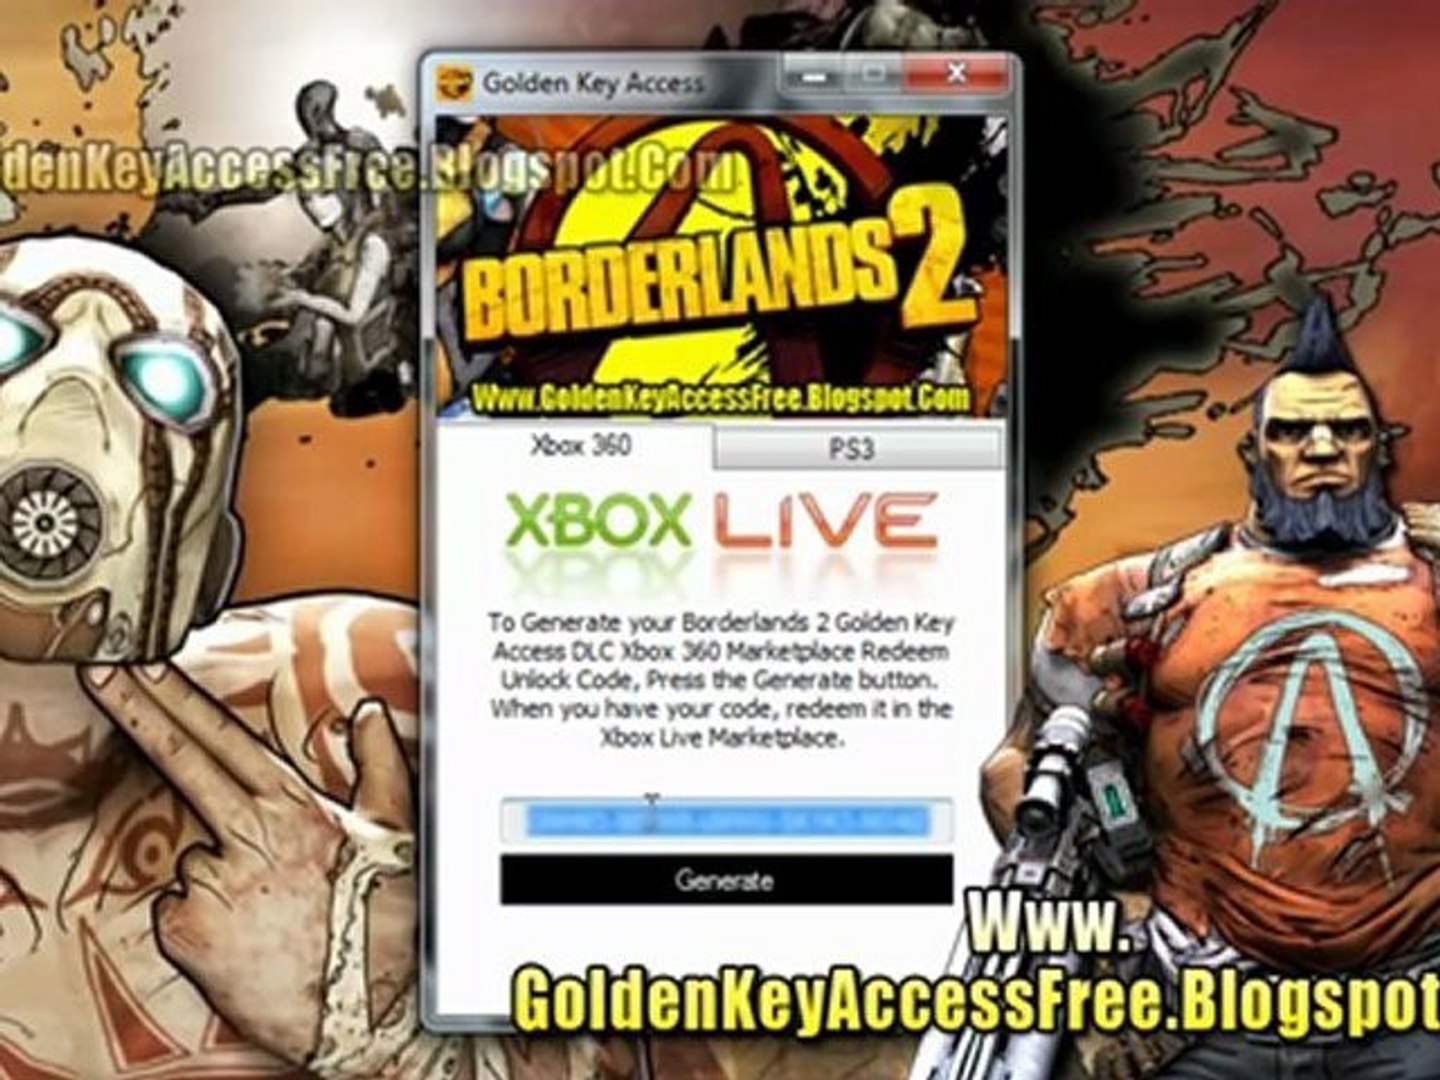 How To Download Borderlands 2 Golden Key Access DLC - video Dailymotion